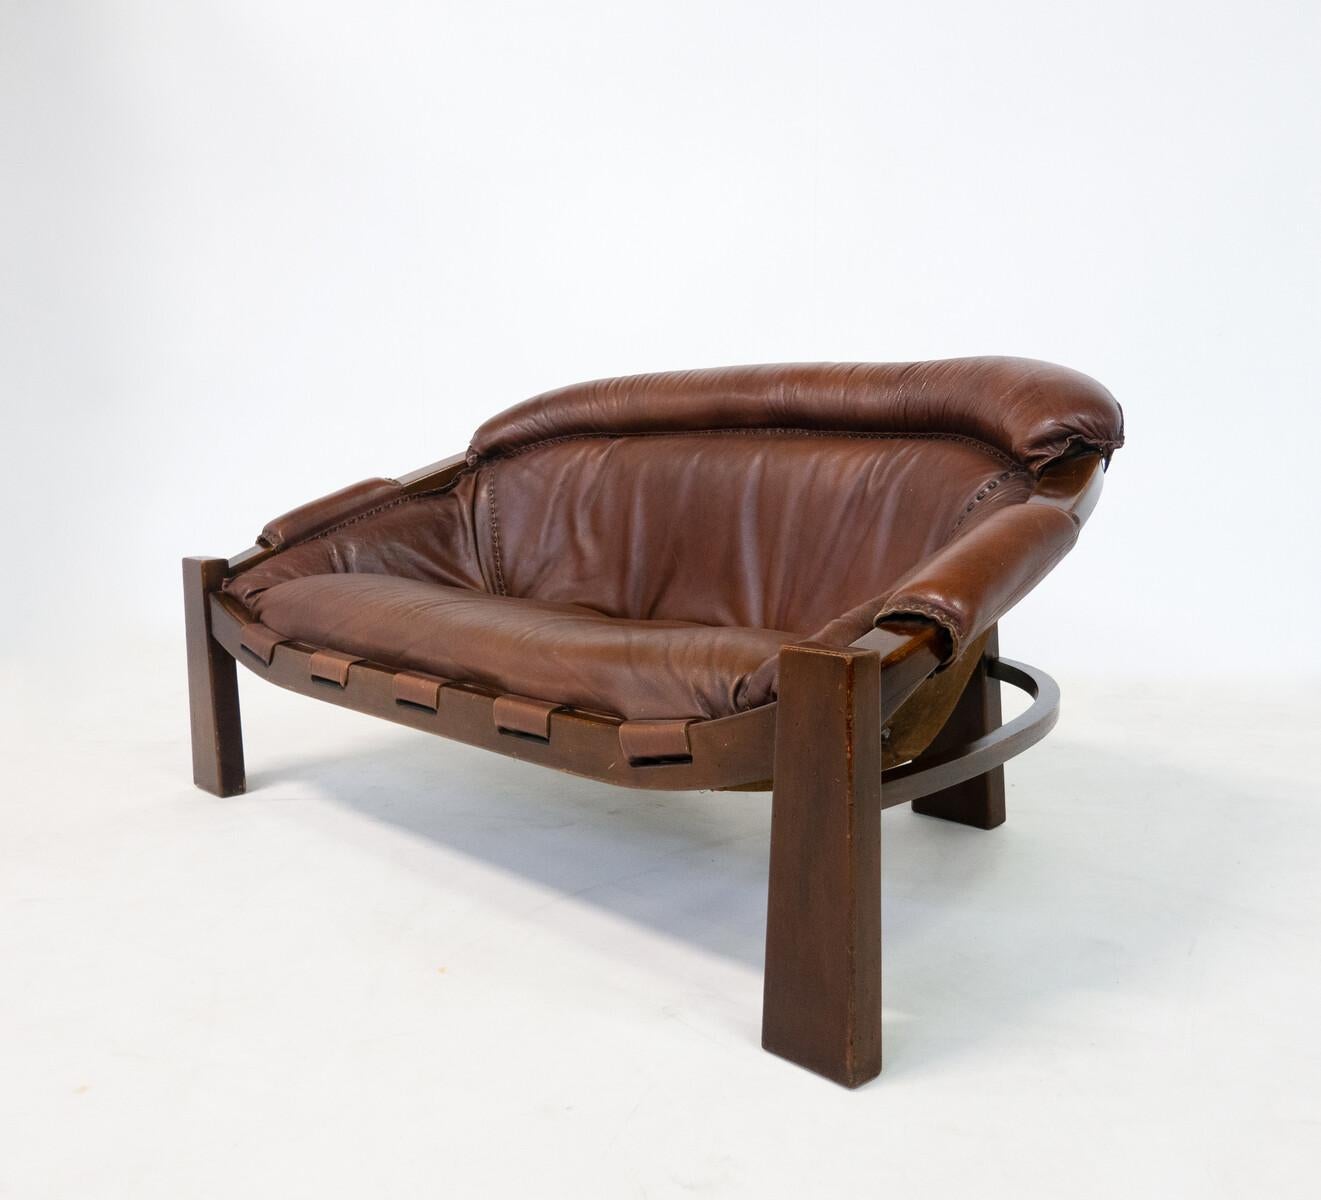 Mid-Century Modern Italian Sofa by Luciano Frigerio, Leather, 1970s For Sale 7